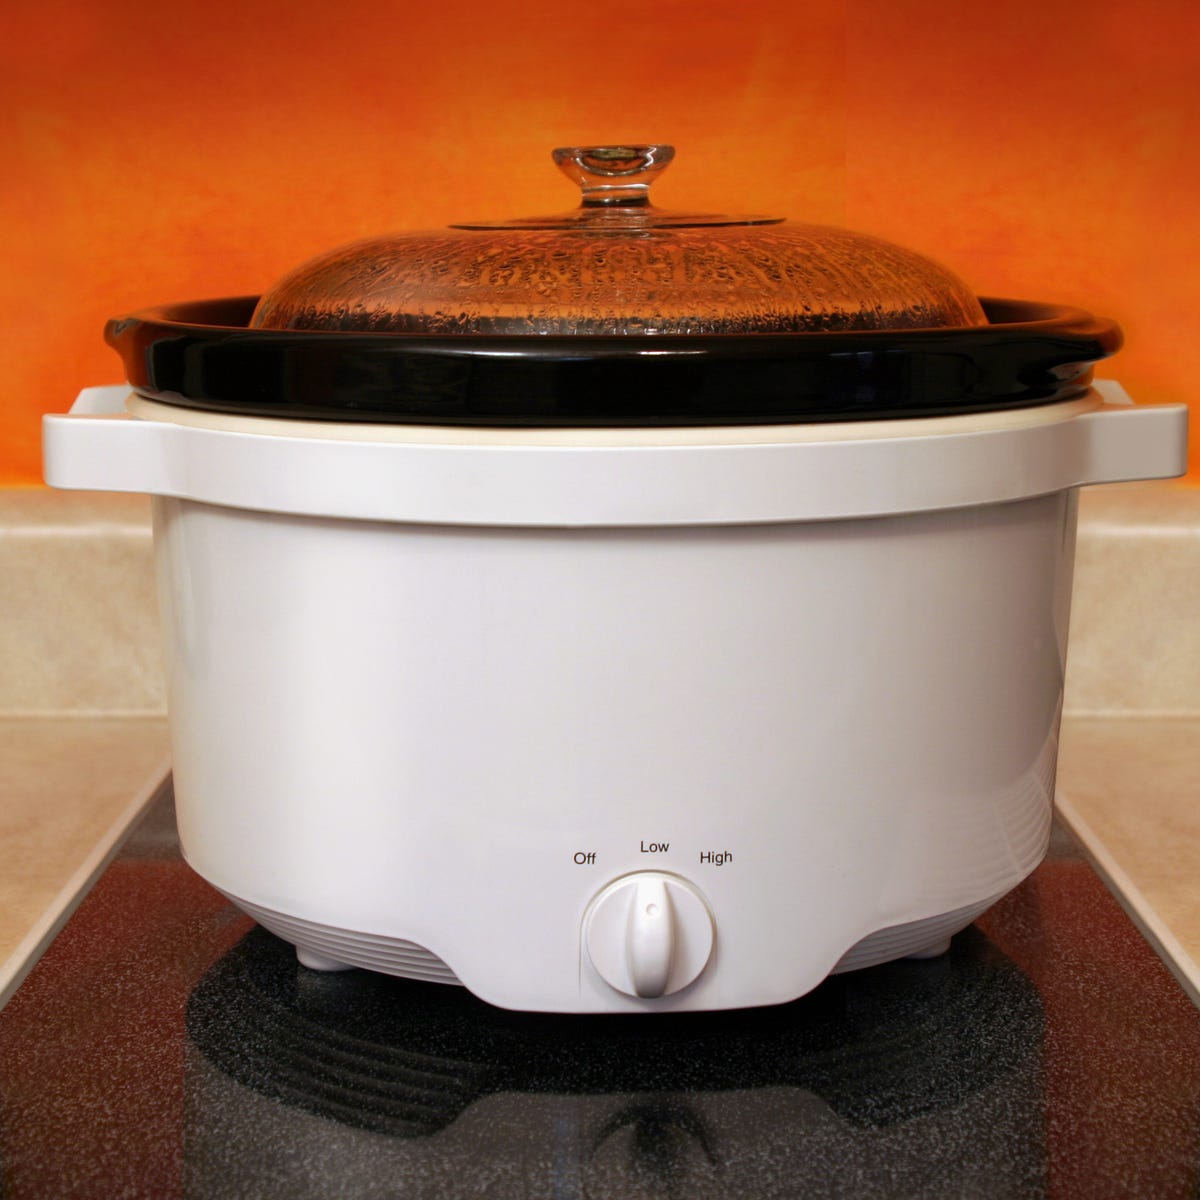 5 Common Slow Cooker Mistakes You Need to Avoid - CNET